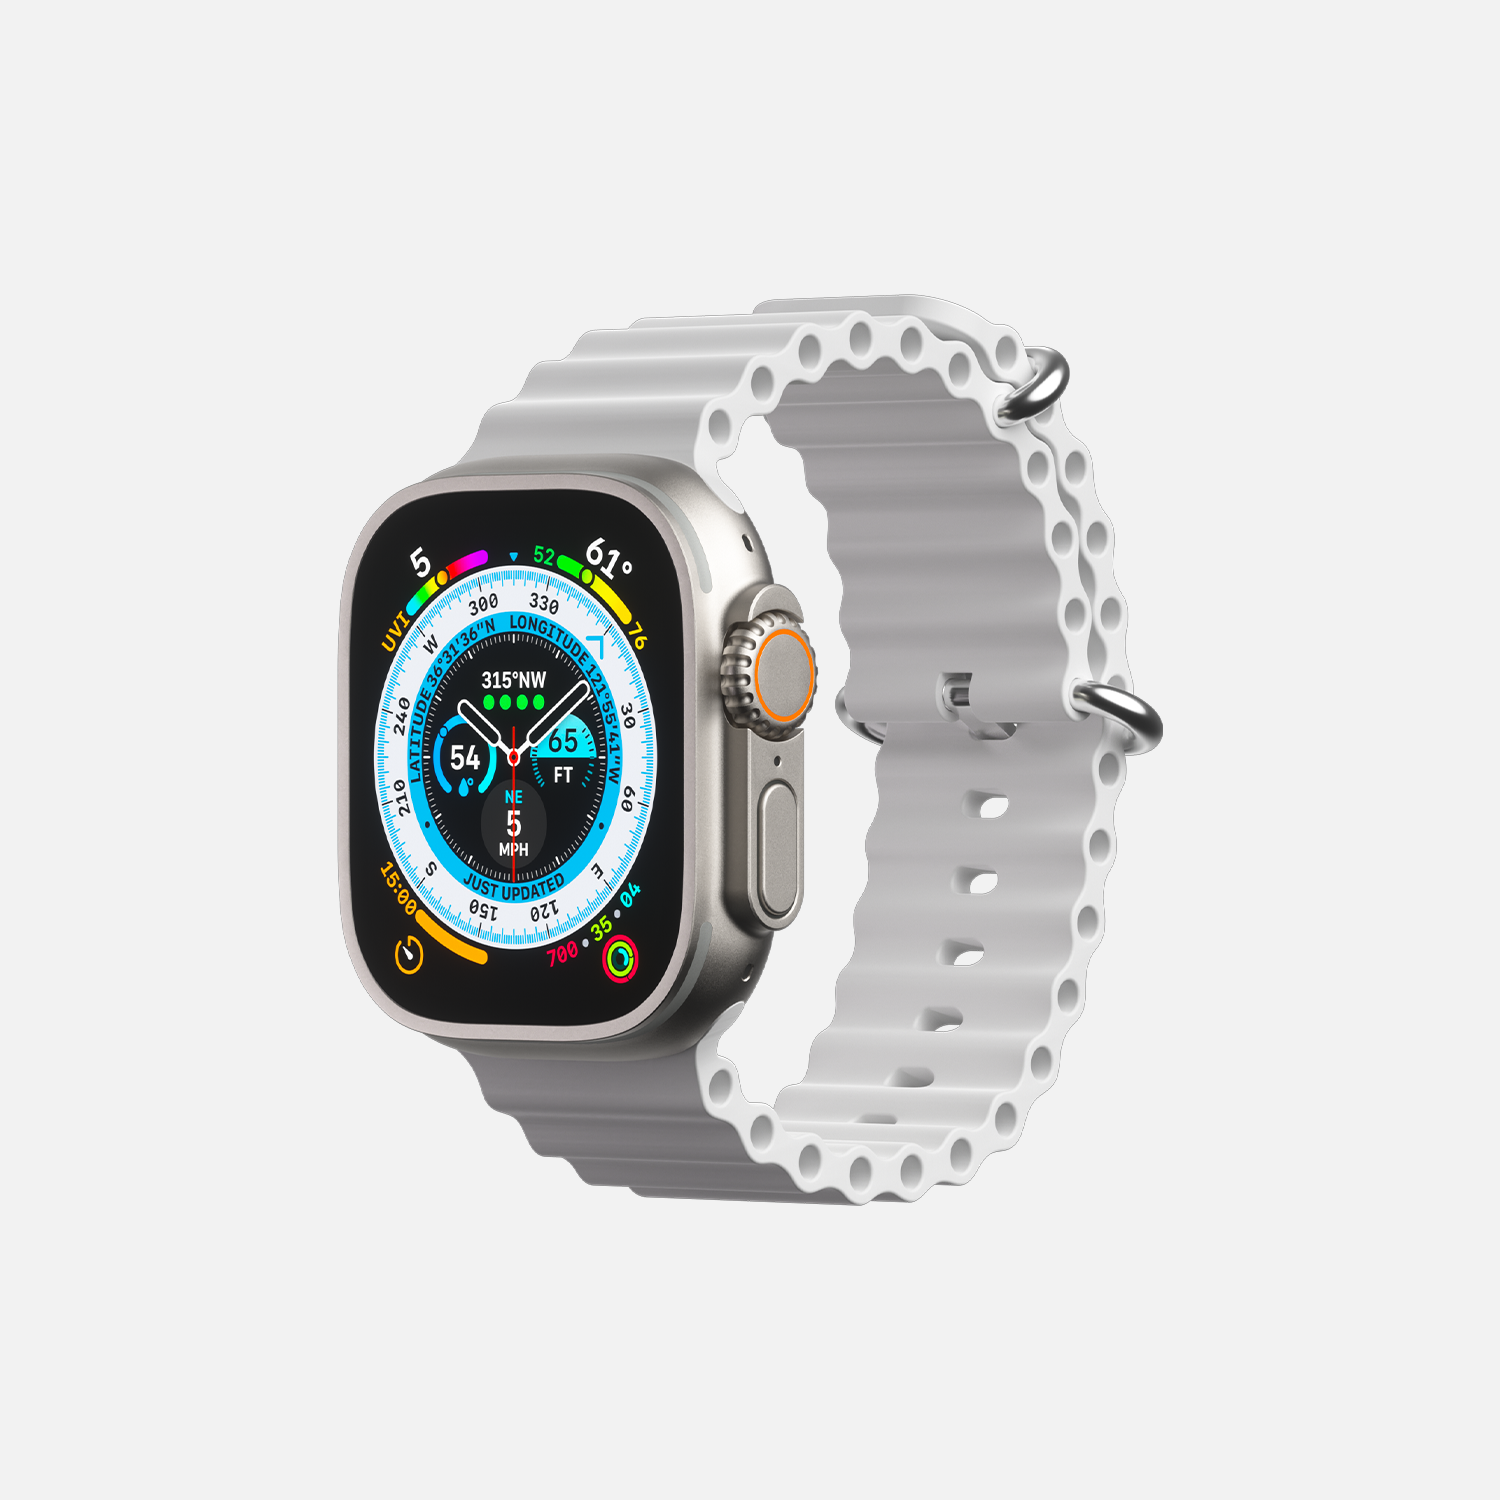 Smartwatch with colorful display and white sports band on a white background.